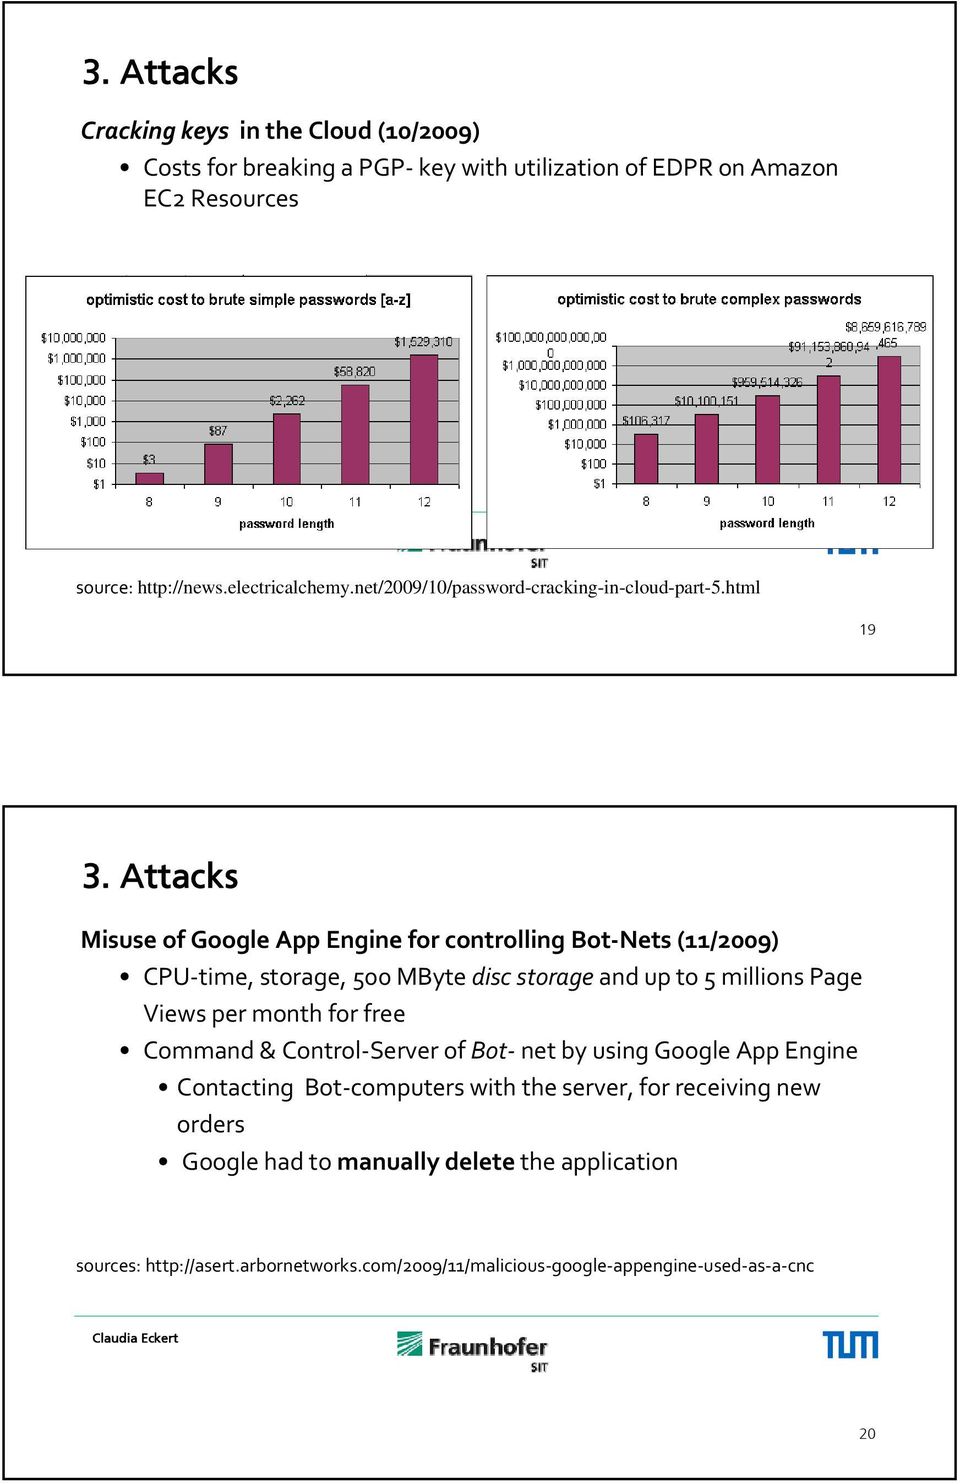 Attacks Misuse of Google App Engine for controlling Bot Nets (11/2009) CPU time, storage, 500 MByte disc storage and up to 5 millions Page Views per month for